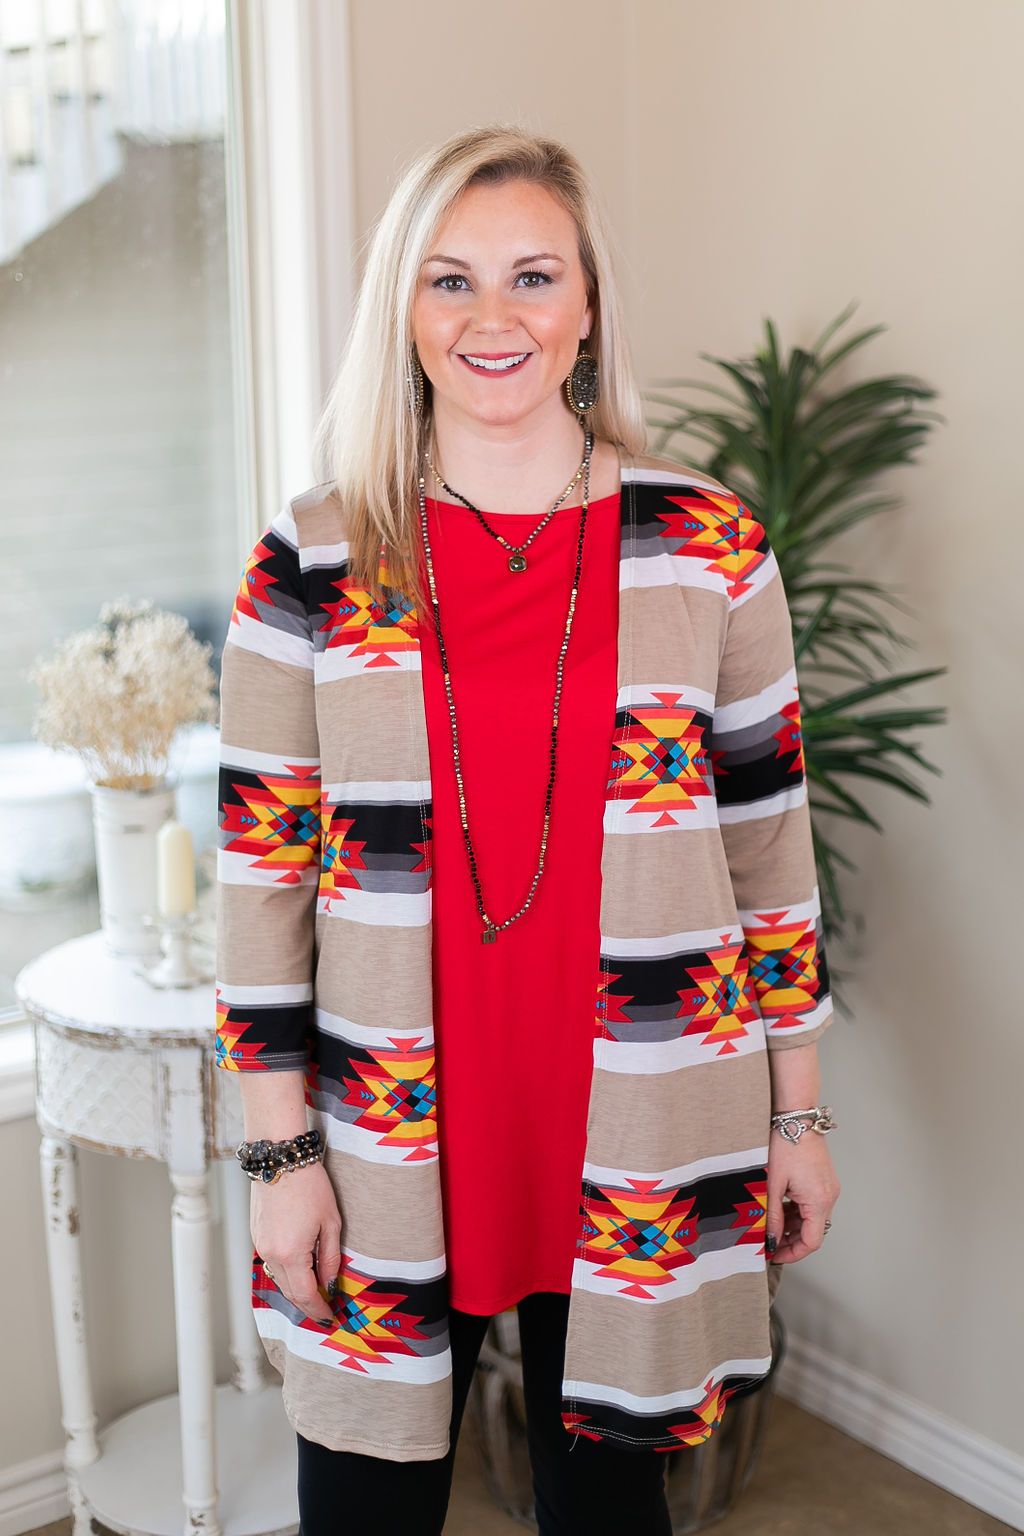 All Eyes On You Aztec Print Cardigan in Tan and Black red tribal print kimono